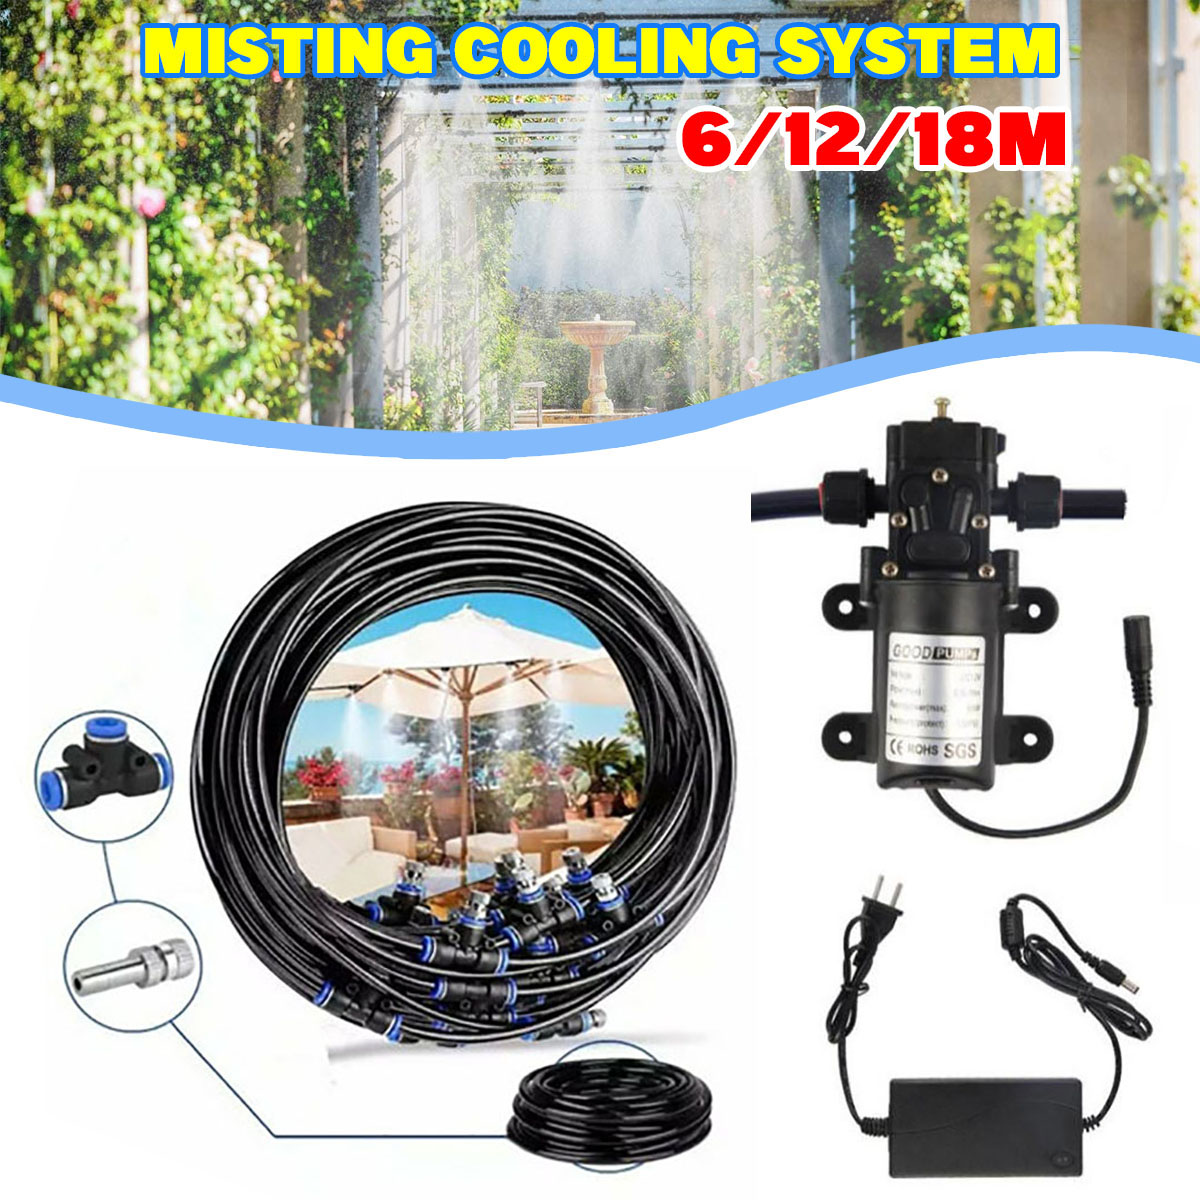 Water-Misting-Cooling-System-Mist-Sprinkler-Nozzle-Plant-Garden-Outdoor-Water-Spray-Patio-Misters-fo-1862026-1